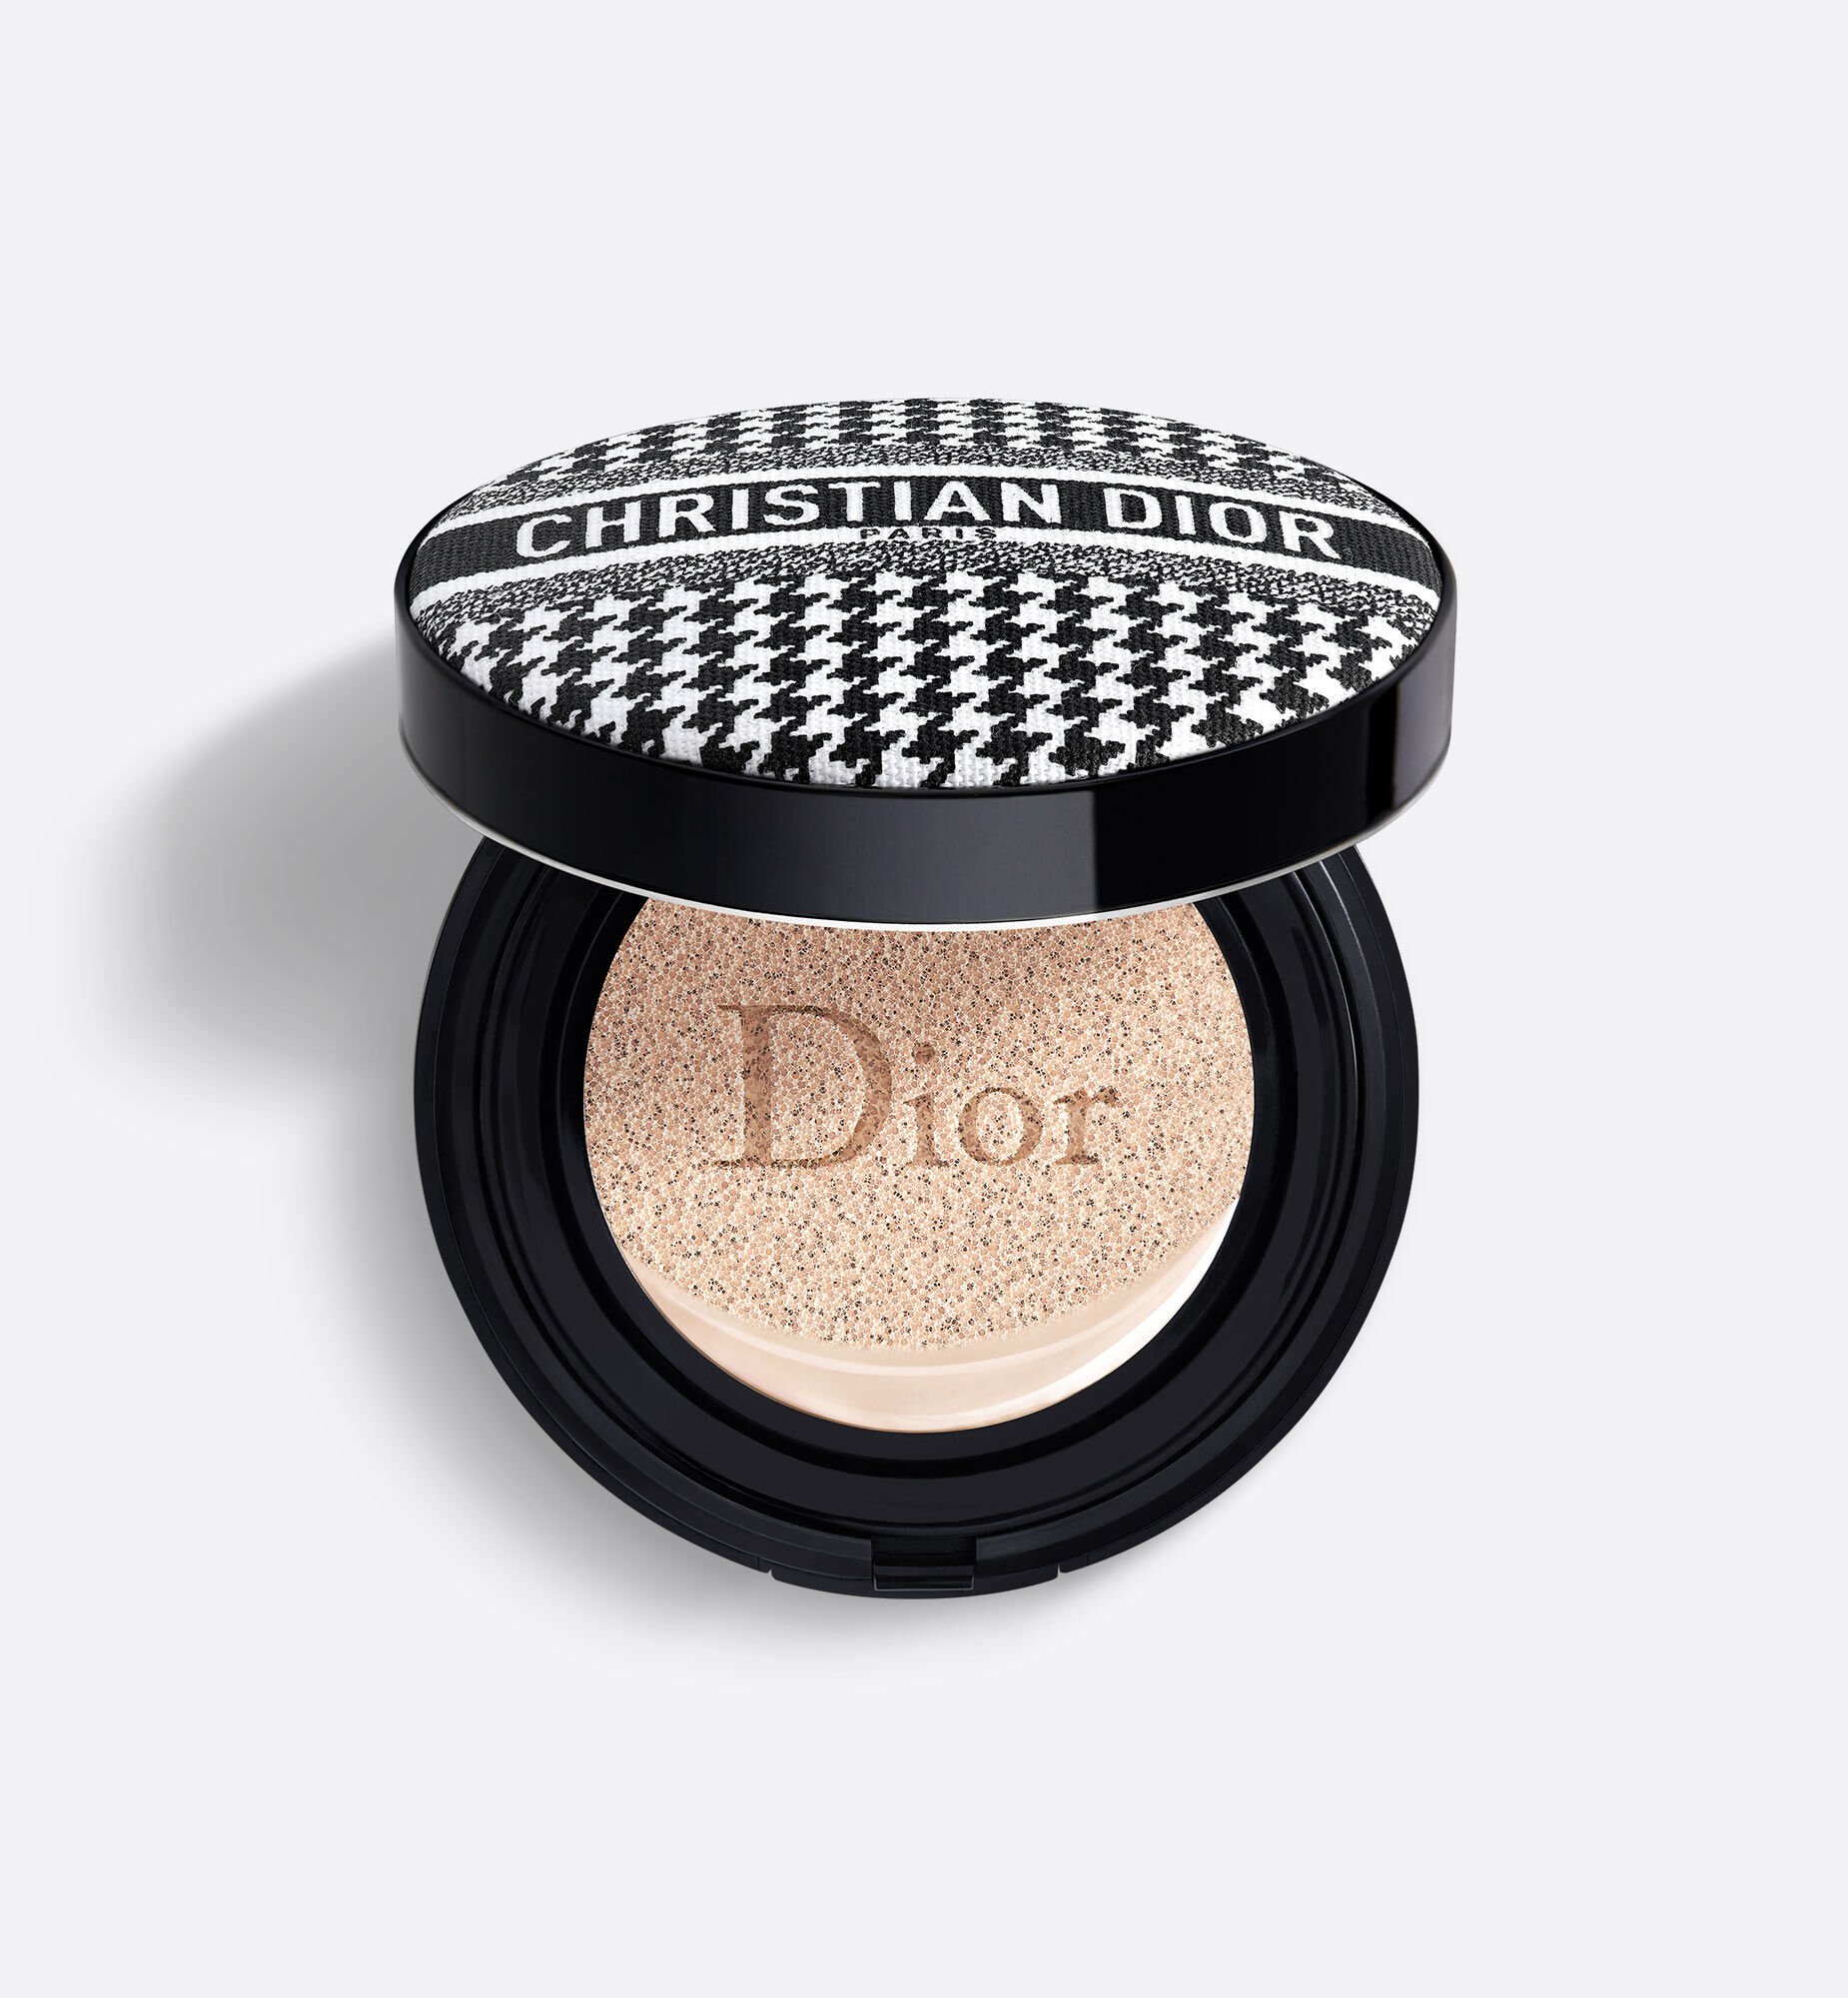 Dior Forever Couture Perfect Cushion New Look Limited Edition  DIOR